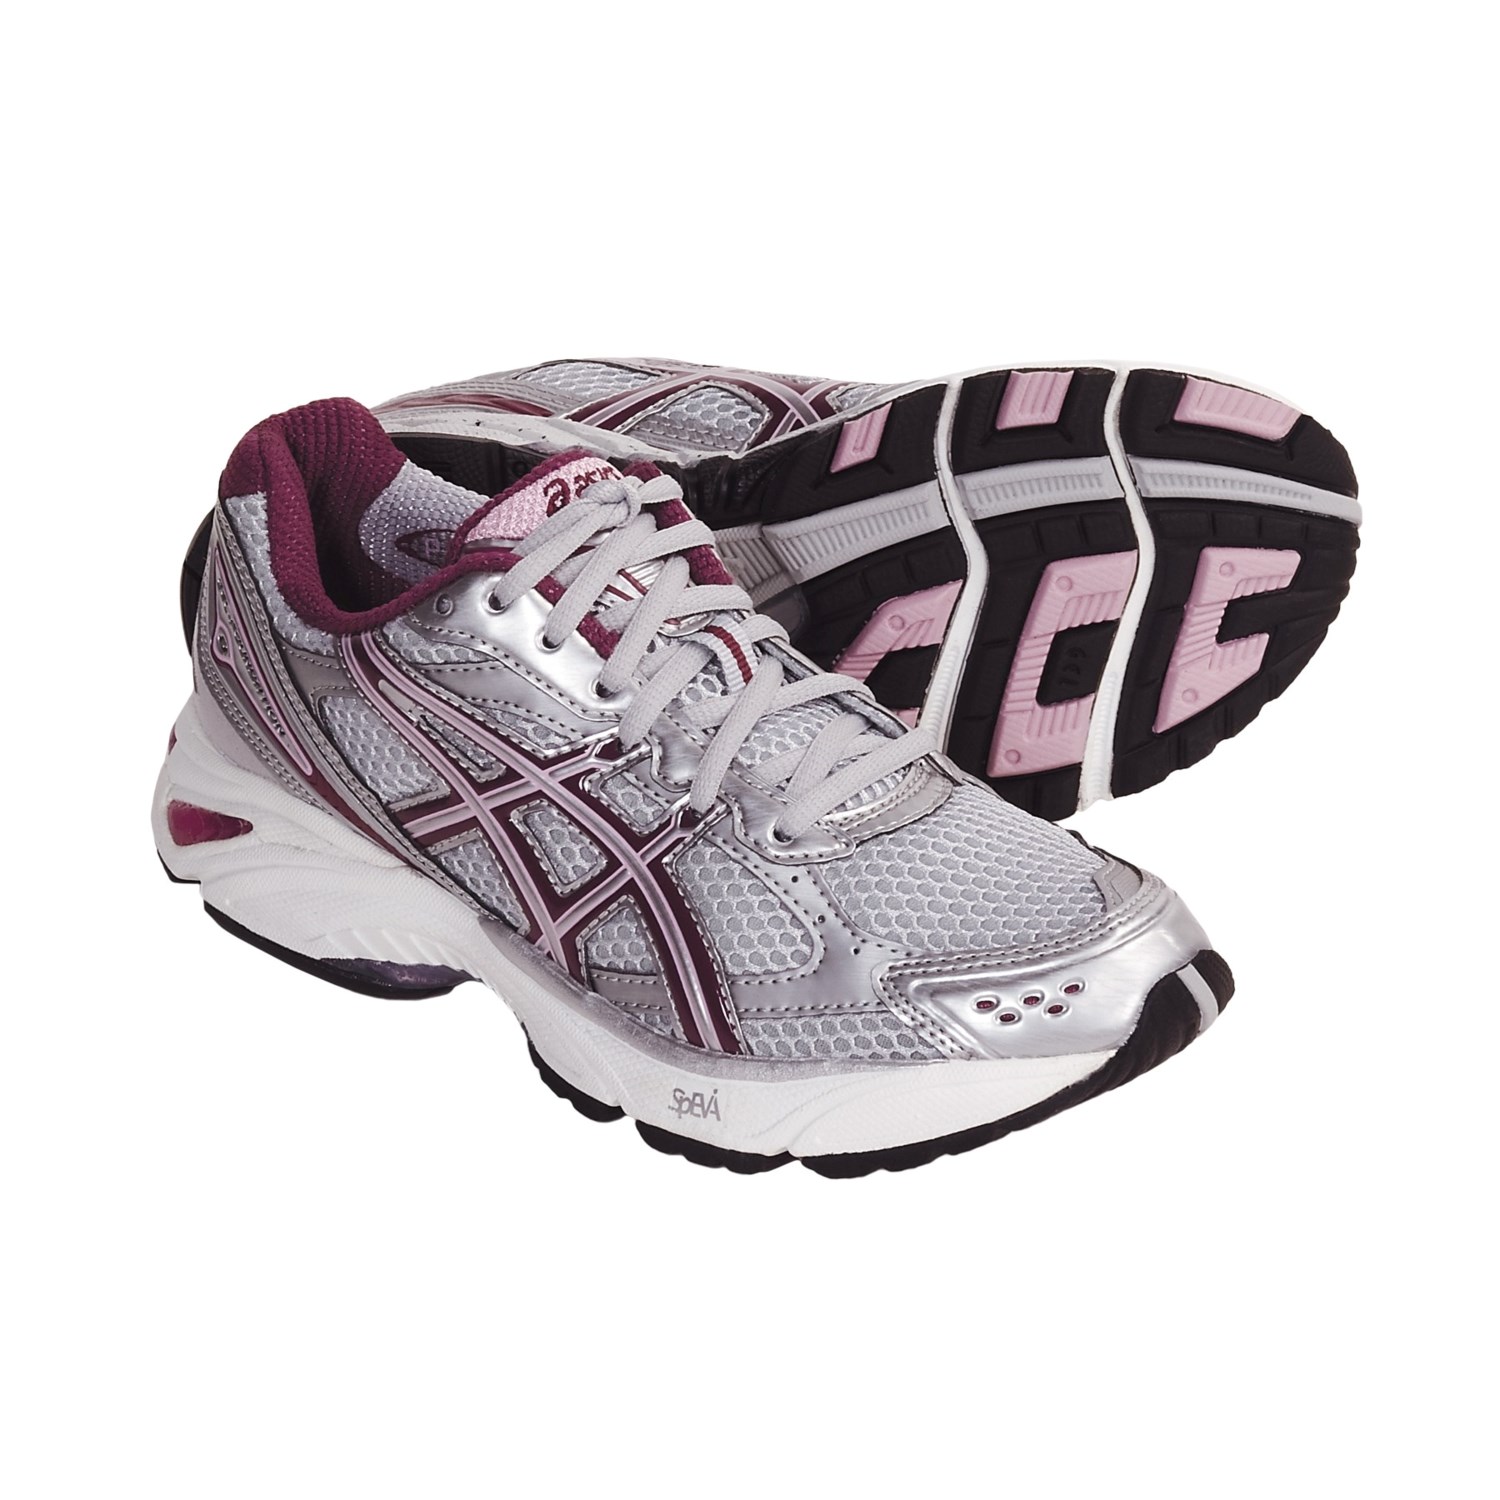 Asics GEL-Foundation 8 Running Shoes (For Women) 3049F - Save 27%